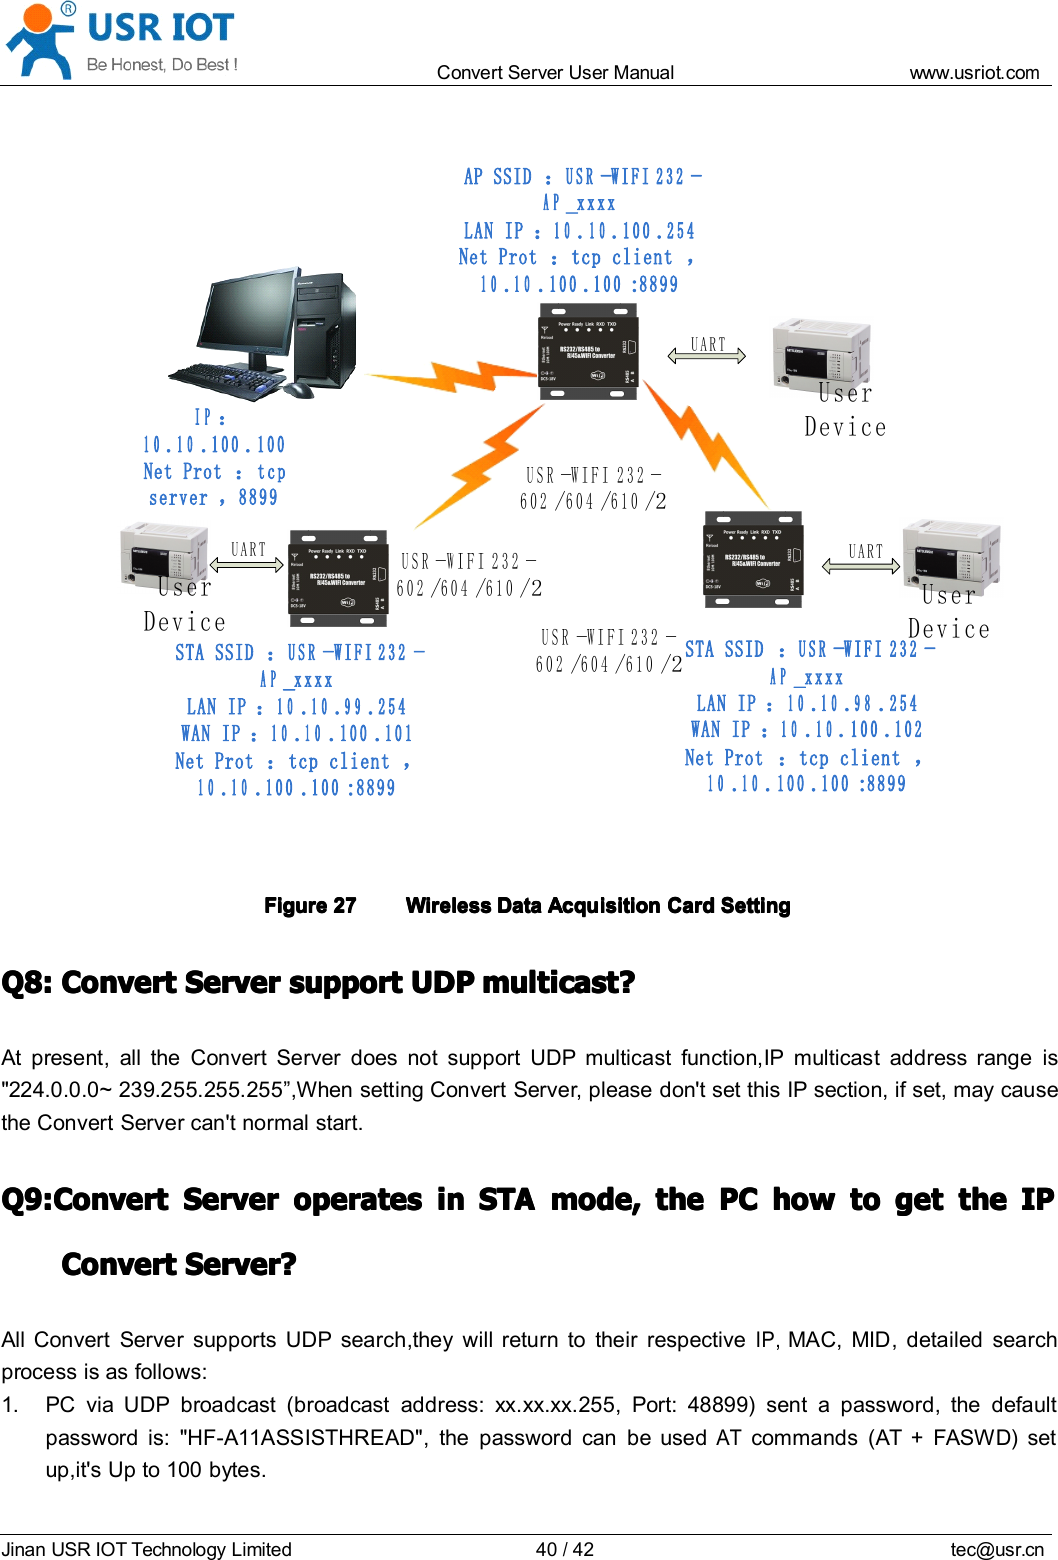 Convert Server User Manual www.usr iot.c omJinan USR IOT Technology Limited 40/42 tec@usr.cnUSR-WIFI232-602/604/610/ 2User DeviceUARTUSR-WIFI232-602/604/610/ 2User DeviceUARTUSR-WIFI232-602/604/610/ 2User DeviceUARTIP：10.10.100.100Net Prot：tcp server，8899STA SSID：USR-WIFI232-AP_xxxxLAN IP：10.10.99.254WAN IP：10.10.100.101Net Prot：tcp client，10.10.100.100:8899STA SSID：USR-WIFI232-AP_xxxxLAN IP：10.10.98.254WAN IP：10.10.100.102Net Prot：tcp client，10.10.100.100:8899AP SSID：USR-WIFI232-AP_xxxxLAN IP：10.10.100.254Net Prot：tcp client，10.10.100.100:8899FigureFigureFigureFigure 27272727 WirelessWirelessWirelessWireless DataDataDataData AcquisitionAcquisitionAcquisitionAcquisition CardCardCardCard SettingSettingSettingSettingQ8:Q8:Q8:Q8: ConvertConvertConvertConvert ServerServerServerServer supportsupportsupportsupport UDPUDPUDPUDP multicast?multicast?multicast?multicast?At present, all the Convert Server does not support UDP multicast function,IP multicast address range is&quot; 224.0.0.0 ~ 239.255.255.255 ” , When setting Convert Server , please don&apos;t set this IP section, if set, may causethe Convert Server can&apos;t normal start.Q9:ConvertQ9:ConvertQ9:ConvertQ9:Convert ServerServerServerServer operatesoperatesoperatesoperates inininin STASTASTASTA mode,mode,mode,mode, thethethethe PCPCPCPC howhowhowhow totototo getgetgetget thethethethe IPIPIPIPConvertConvertConvertConvert Server?Server?Server?Server?All Convert Server supports UDP search ,they will return to their respectiveIP,MAC, MID, detailed searchprocess is as follows:1. PC via UDP broadcast (broadcast address: xx.xx.xx.255, Port: 48899) sent a password, the defaultpassword is: &quot;HF-A11ASSISTHREAD&quot;, the password can be usedATcommands (AT + FASWD) setup,it&apos;s Up to 100 bytes.